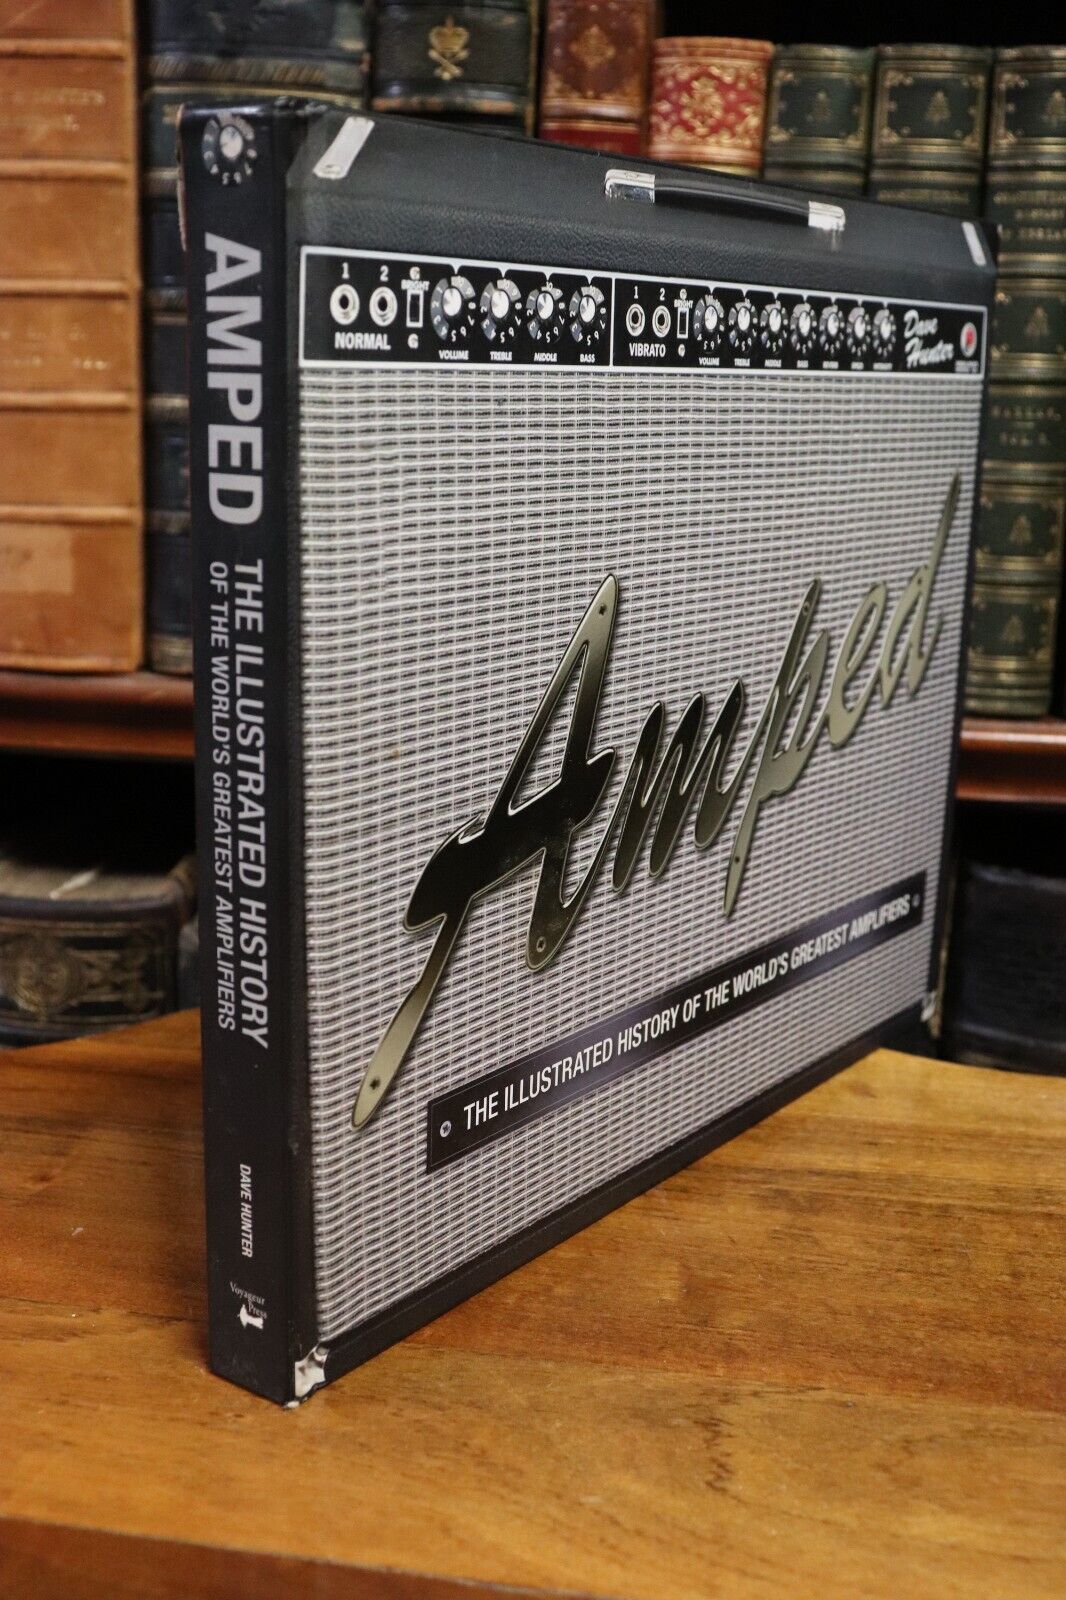 Amped: History Of World's Guitar Amplifiers - 2012 - 1st Edition Reference Book - 0